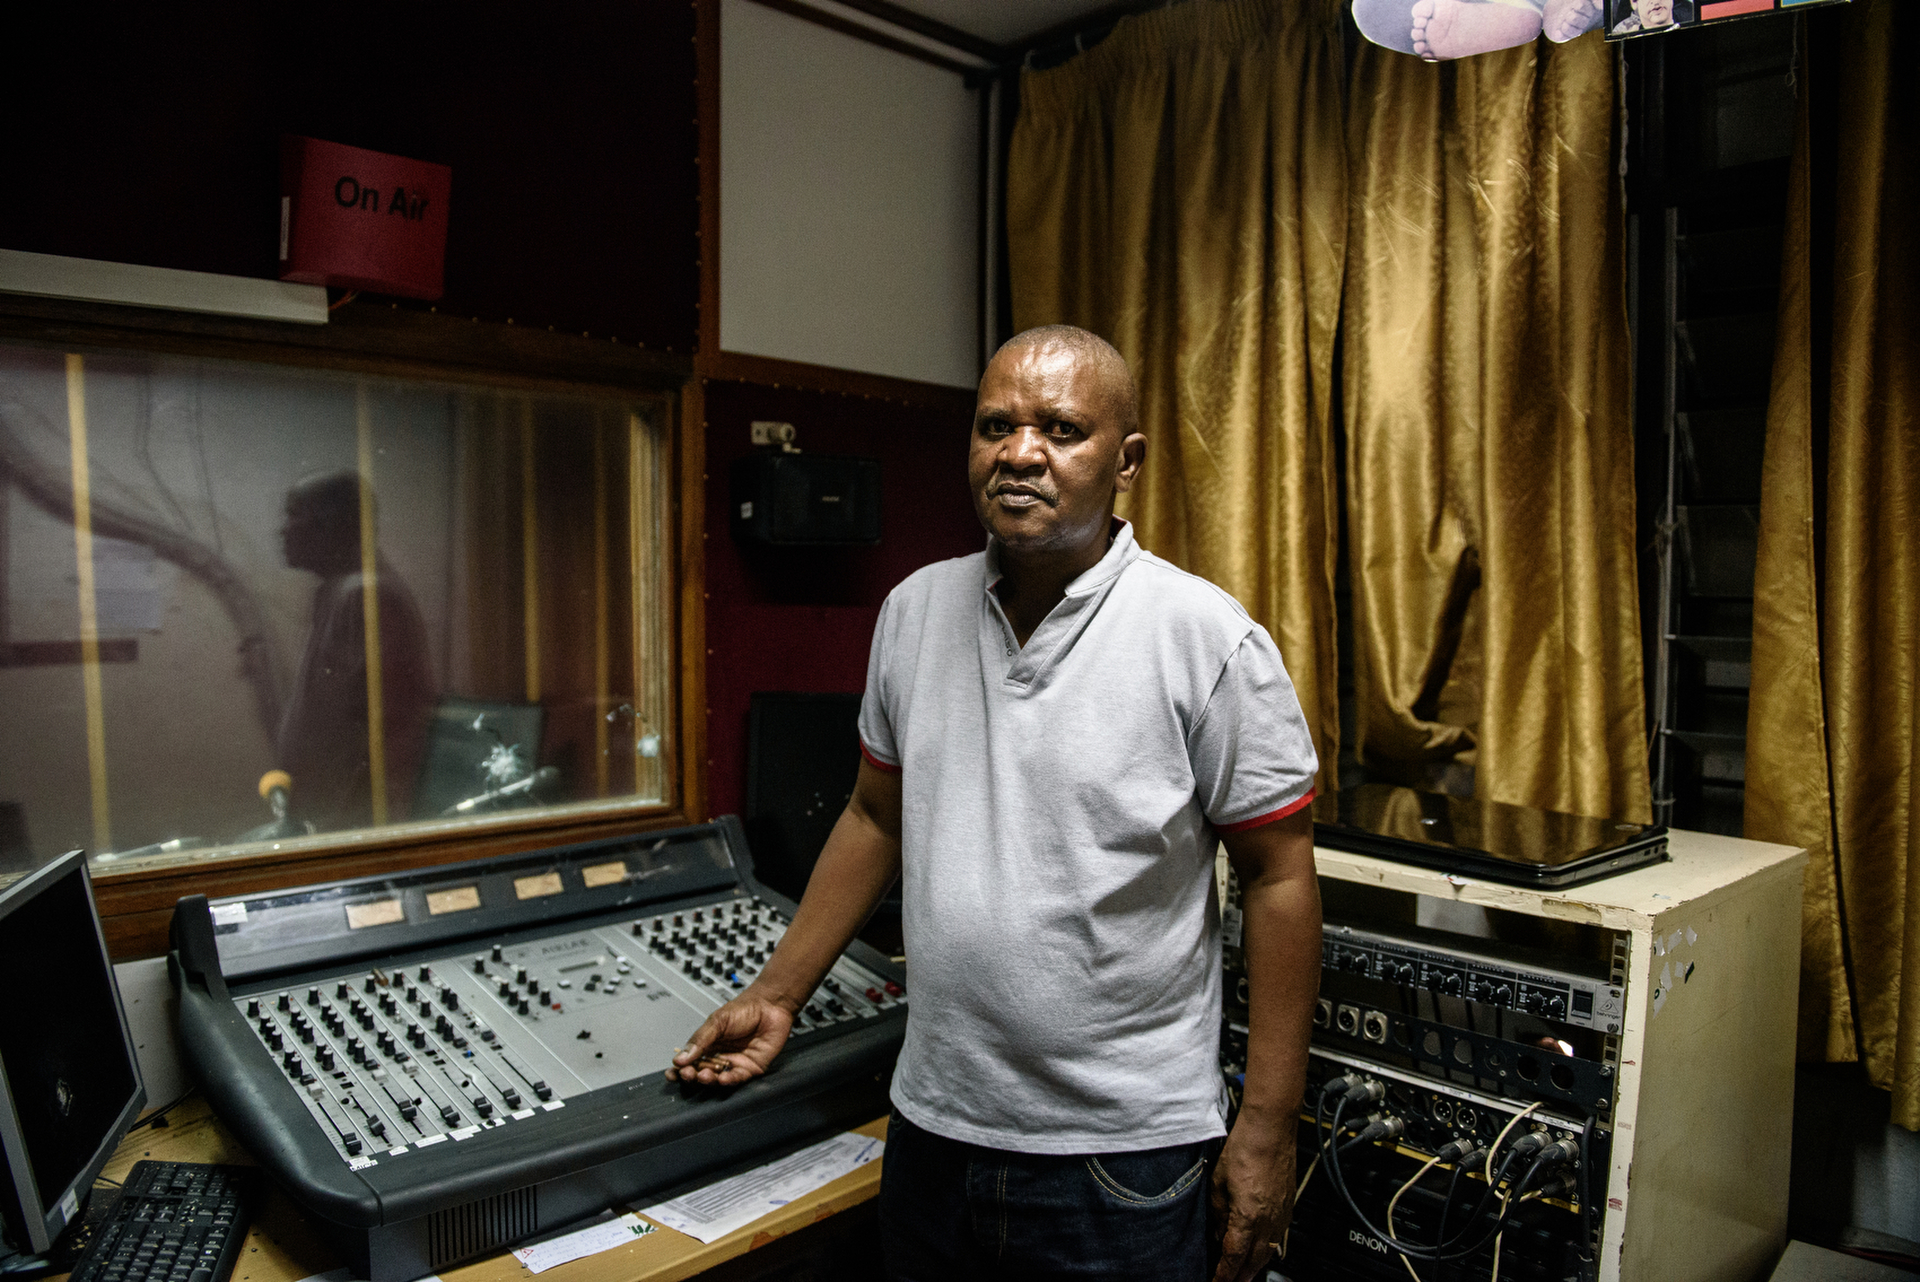  Chief editor of Bonesha radio Leon Masango, in the recording studio that was shot up by security forces during the night of 13-14 May during a coup attempt in Bujumbura, Burundi. 
He said, "I feel sad and angry about what happened. Security forces t